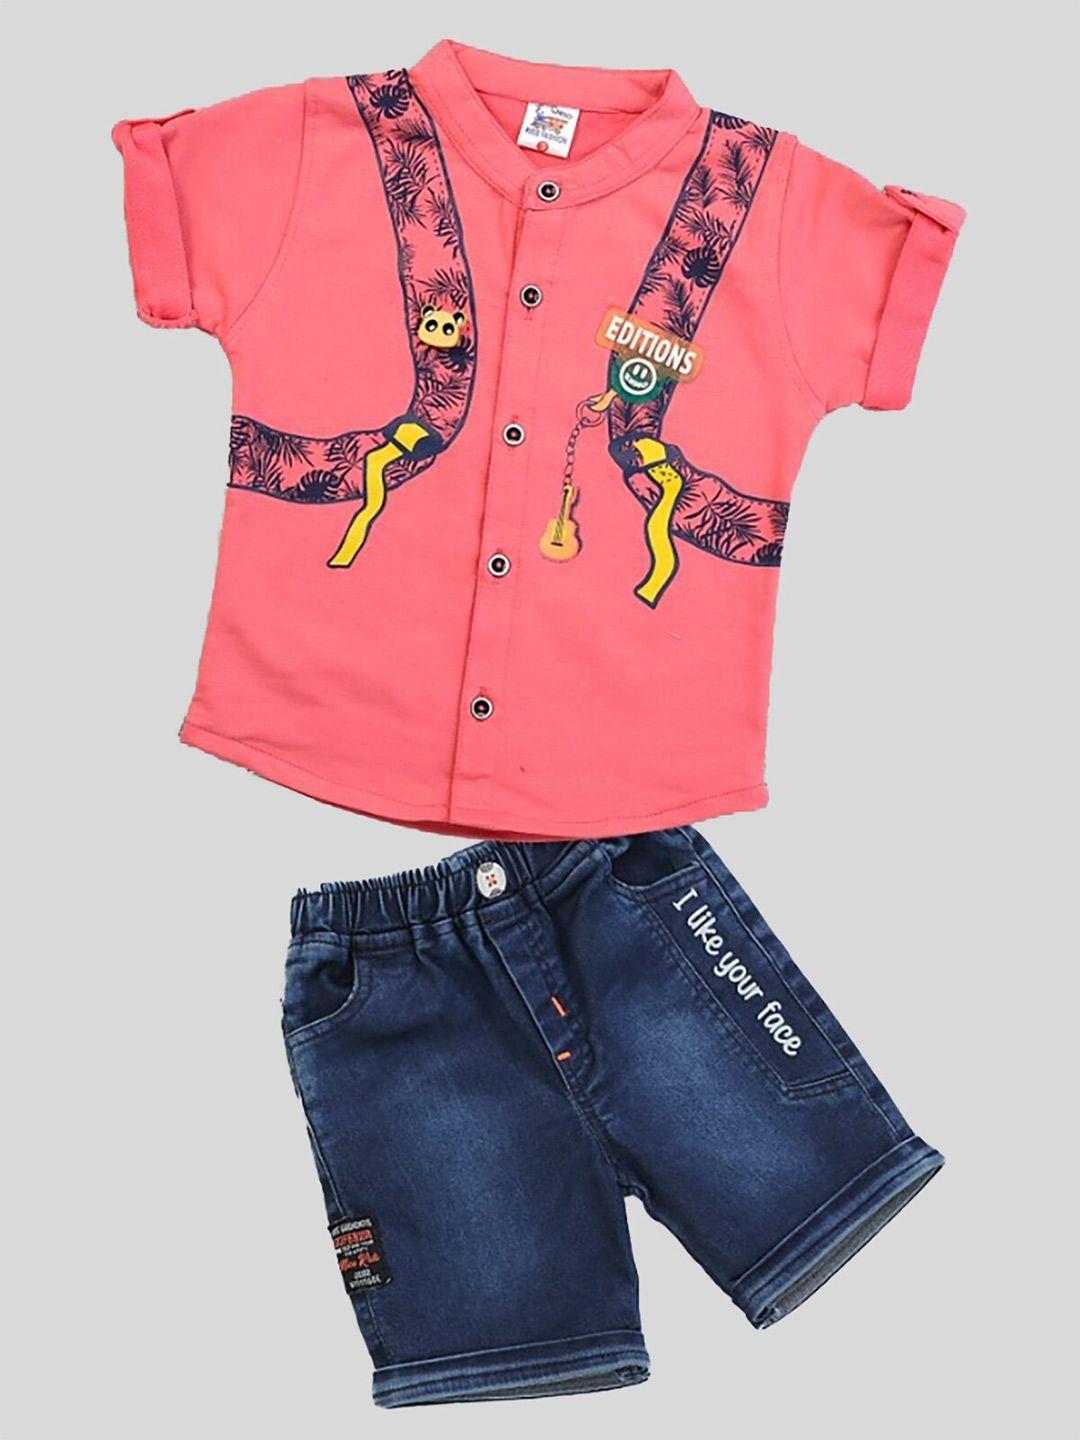 youstylo boys graphic printed roll-up sleeves shirt with shorts